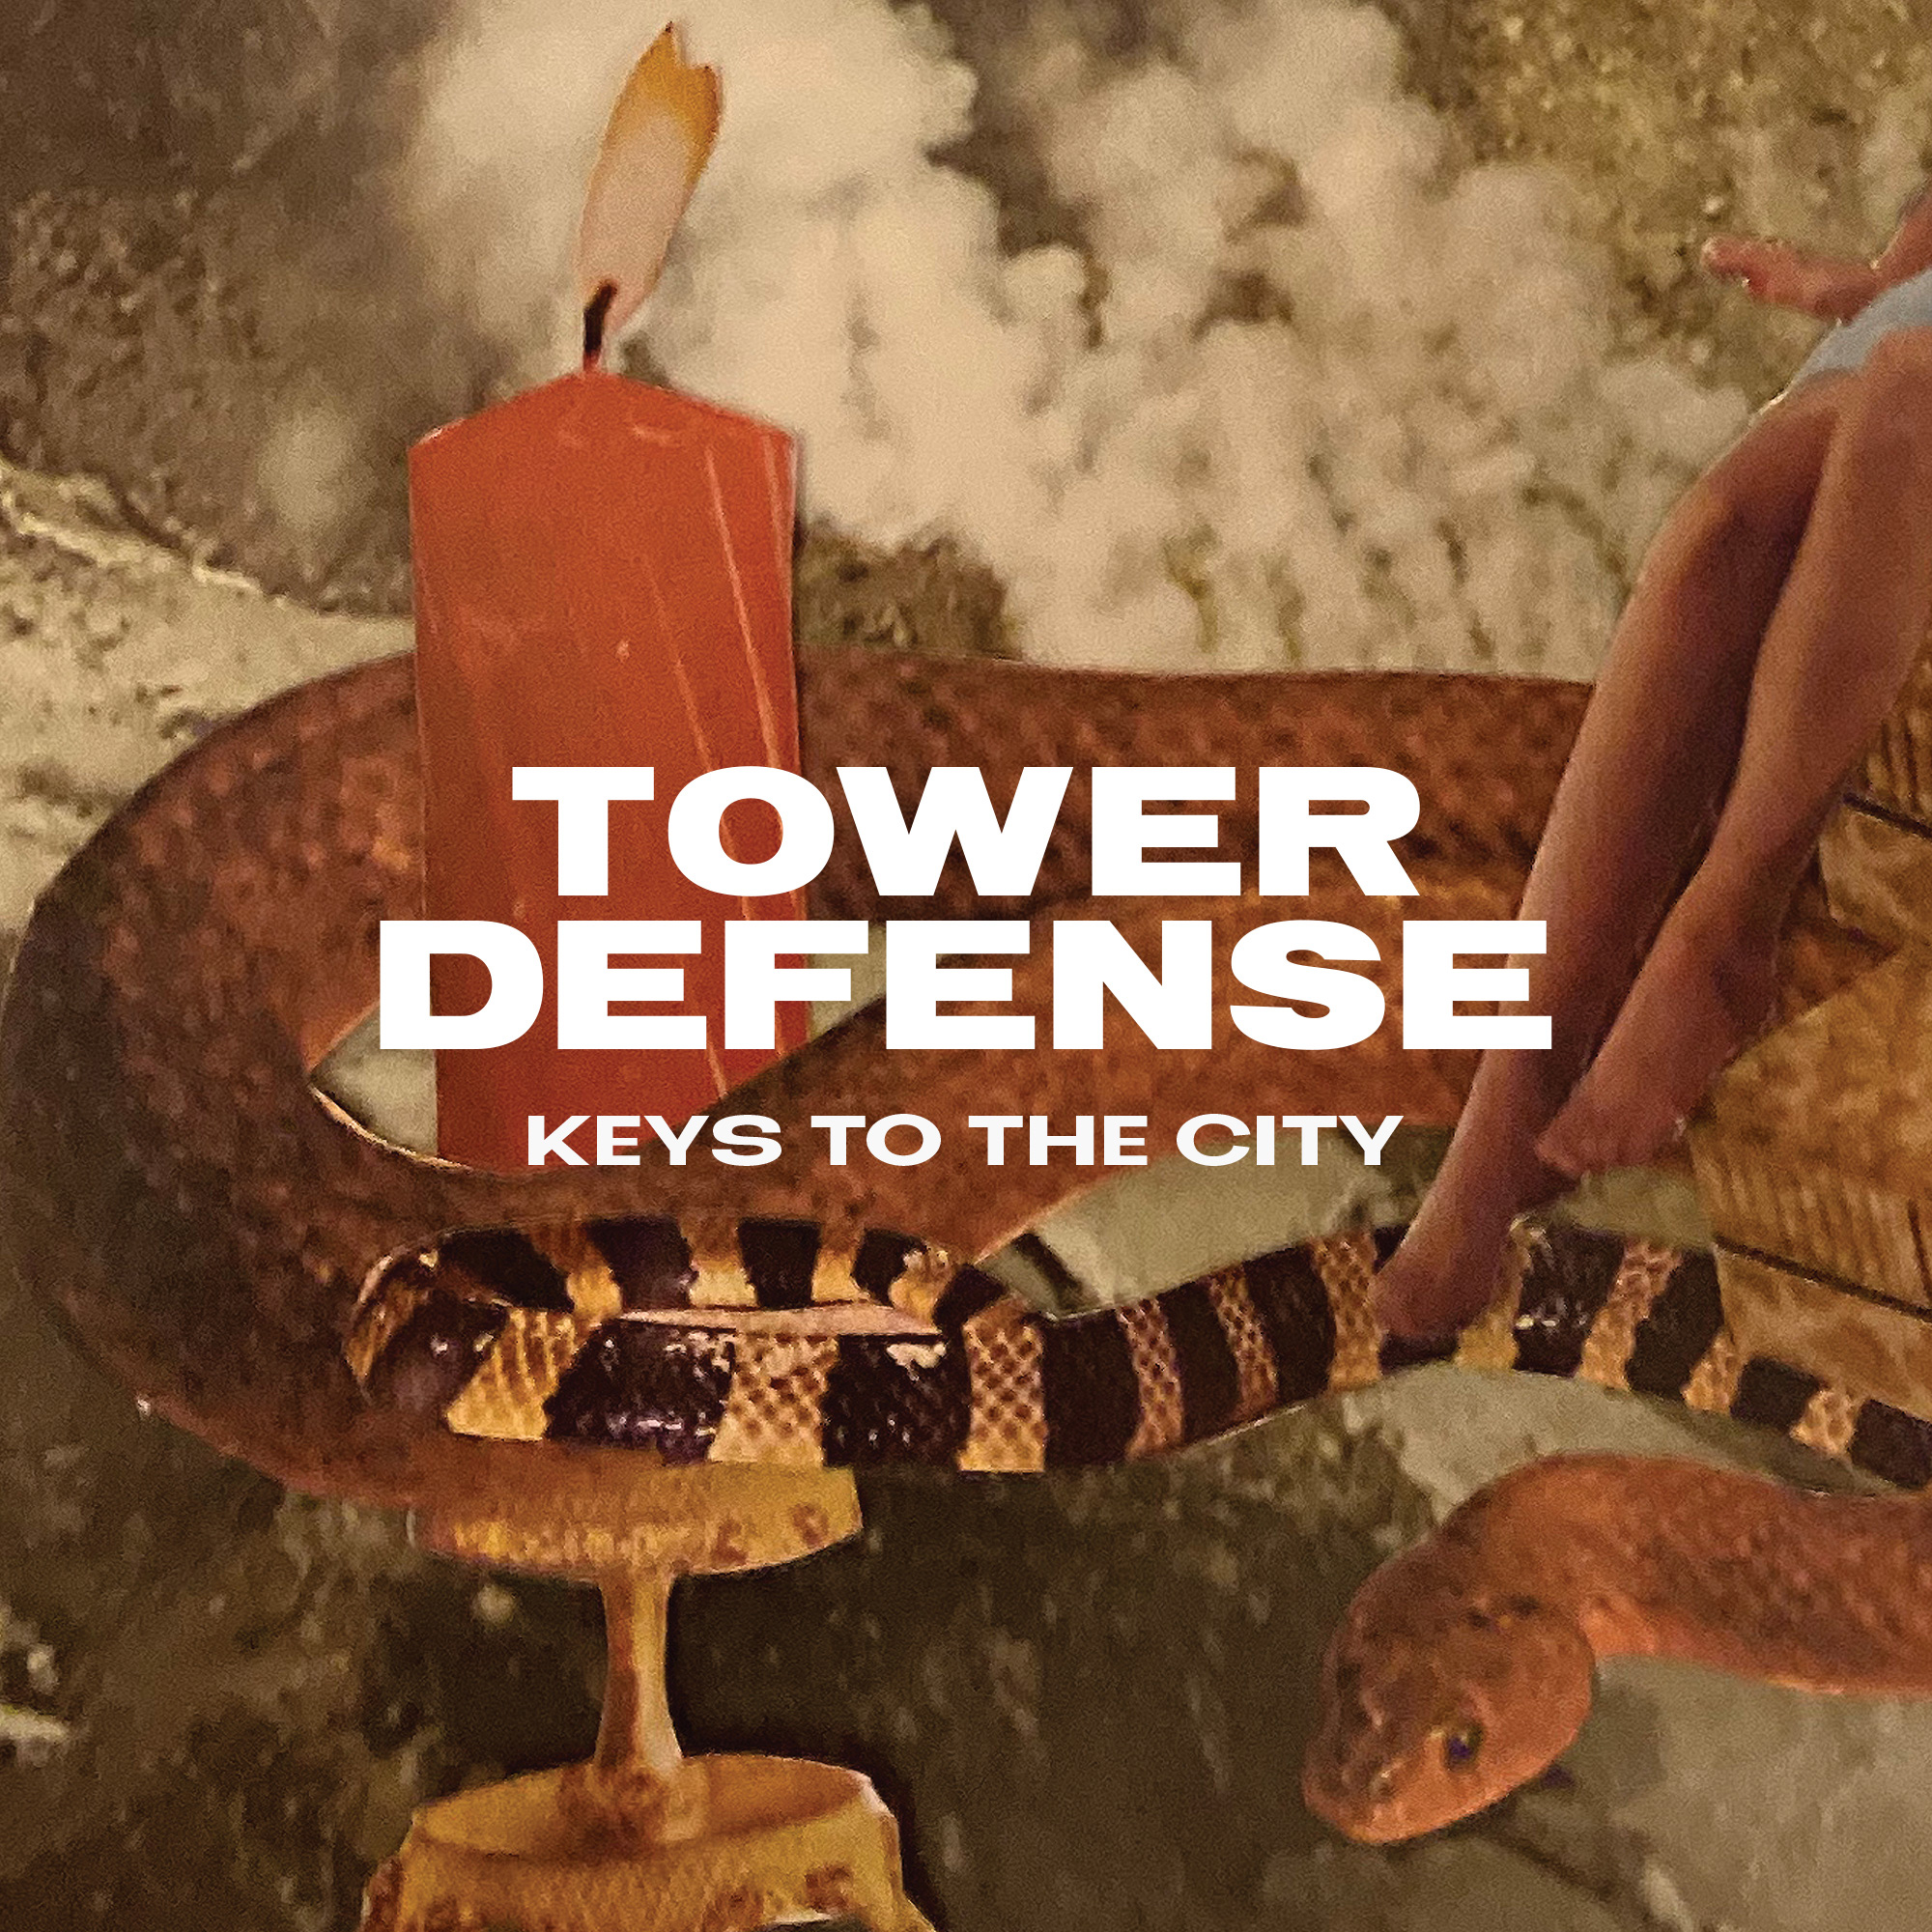 Tower Defense - Keys to the City